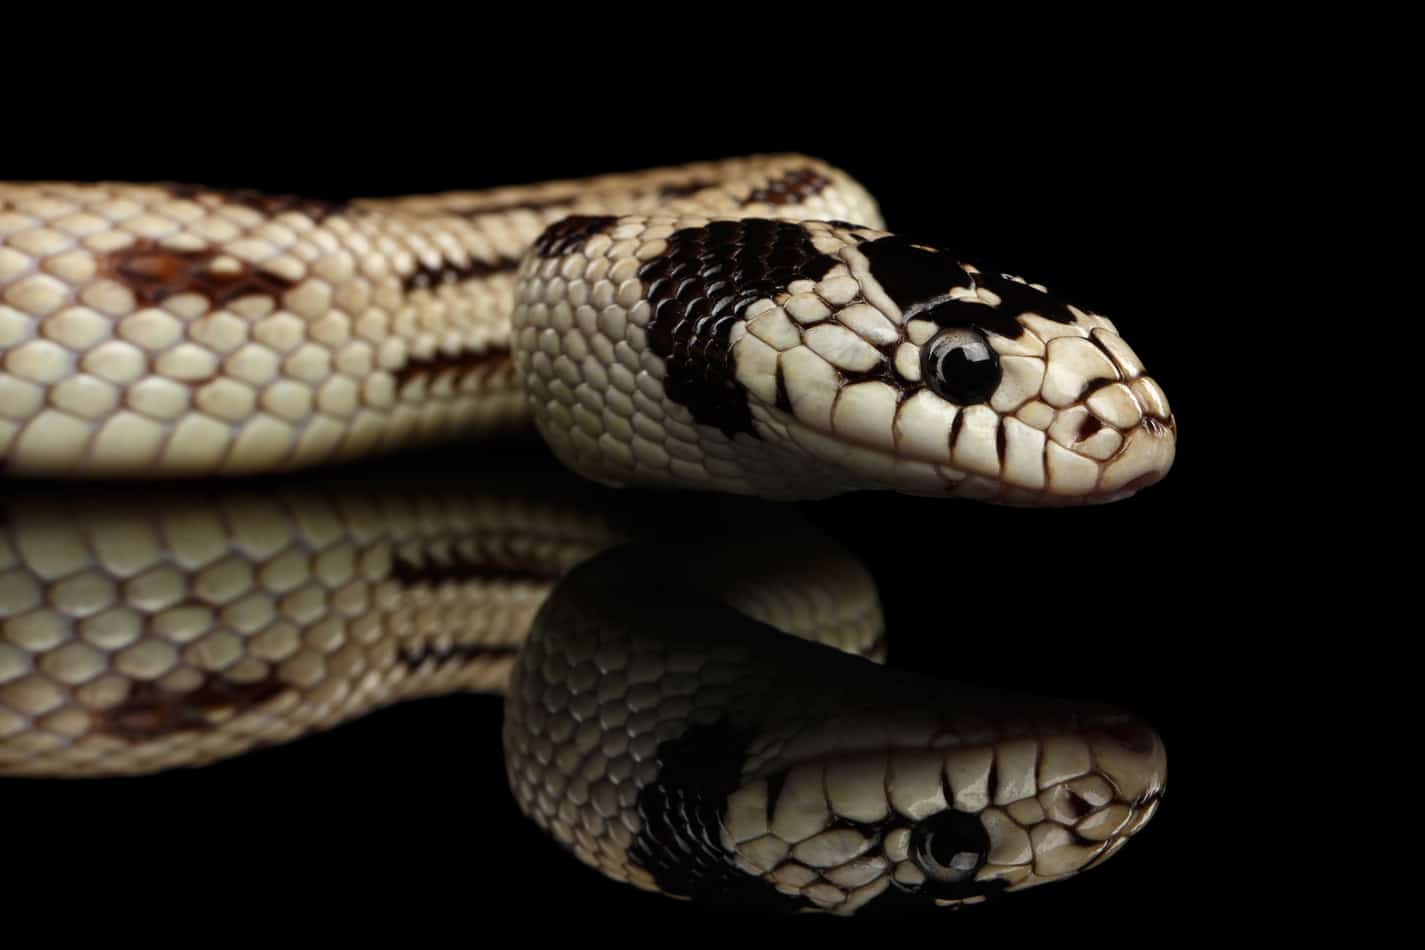 25 cool facts about king snakes 1 California King Snakes: Facts with Pictures and Video